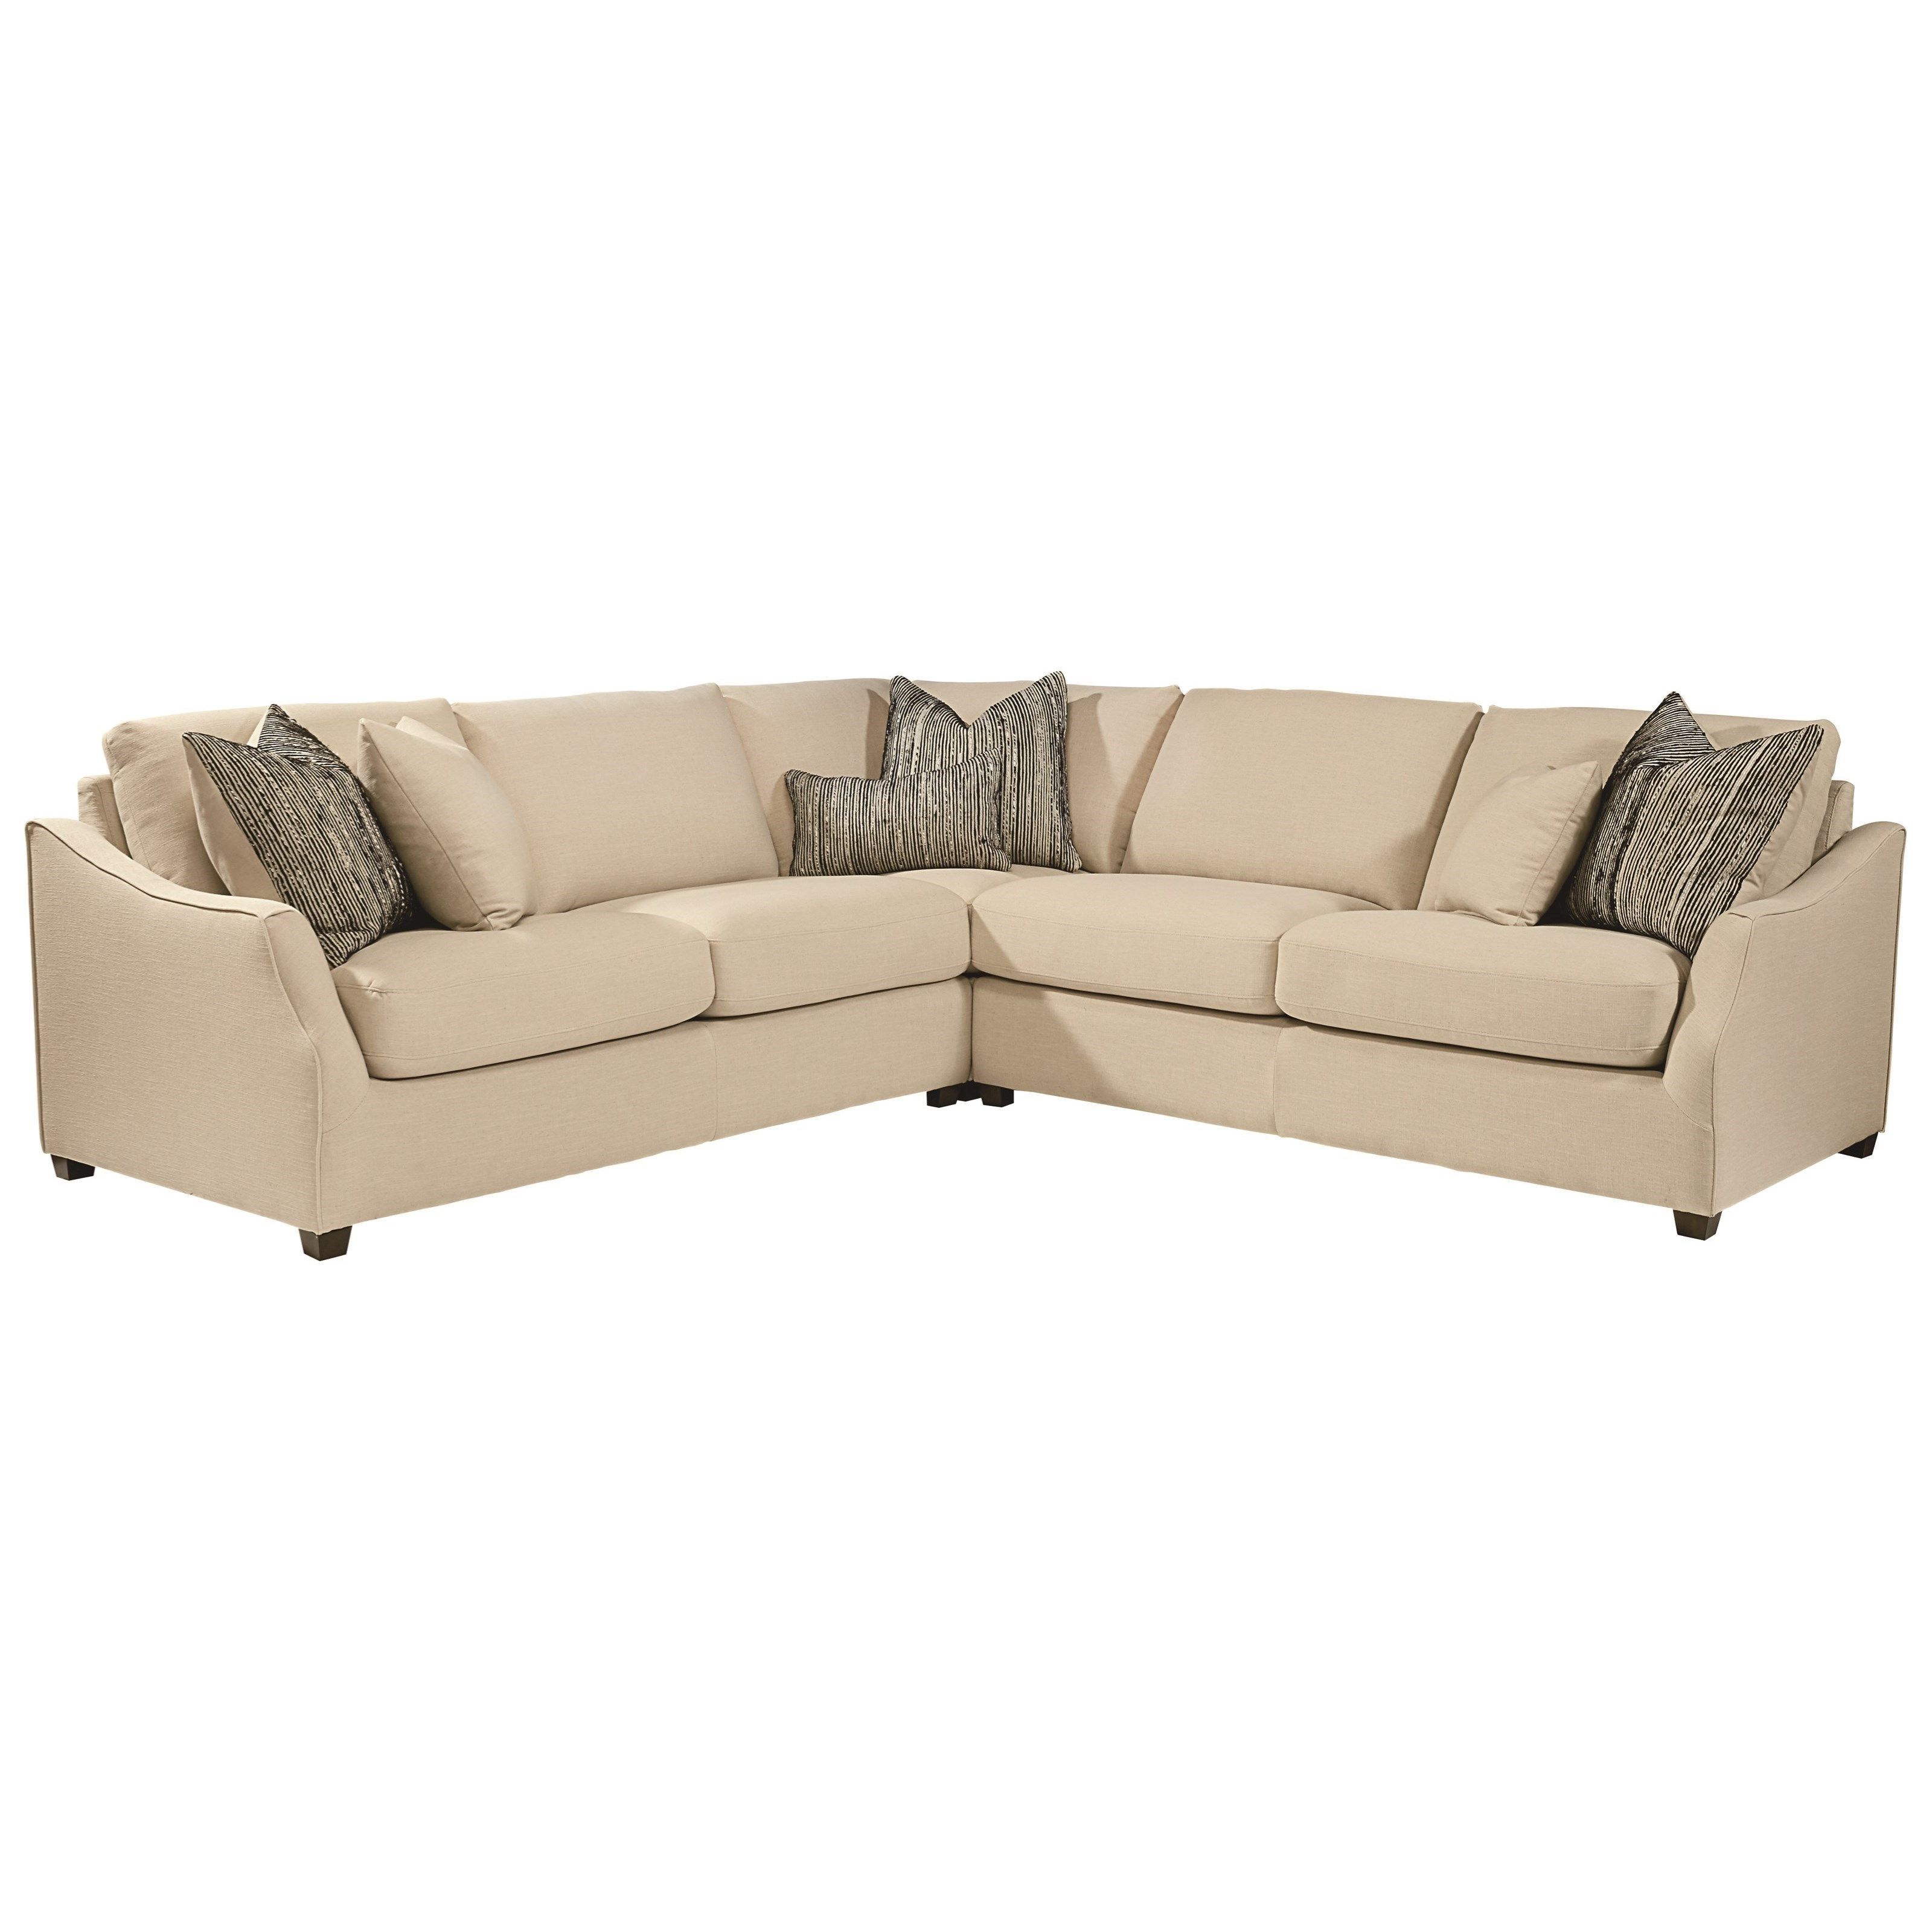 Grand Rapids Mi Sectional Sofas With Regard To Well Known Magnolia Homejoanna Gaines Homestead Three Piece Sectional (View 10 of 20)